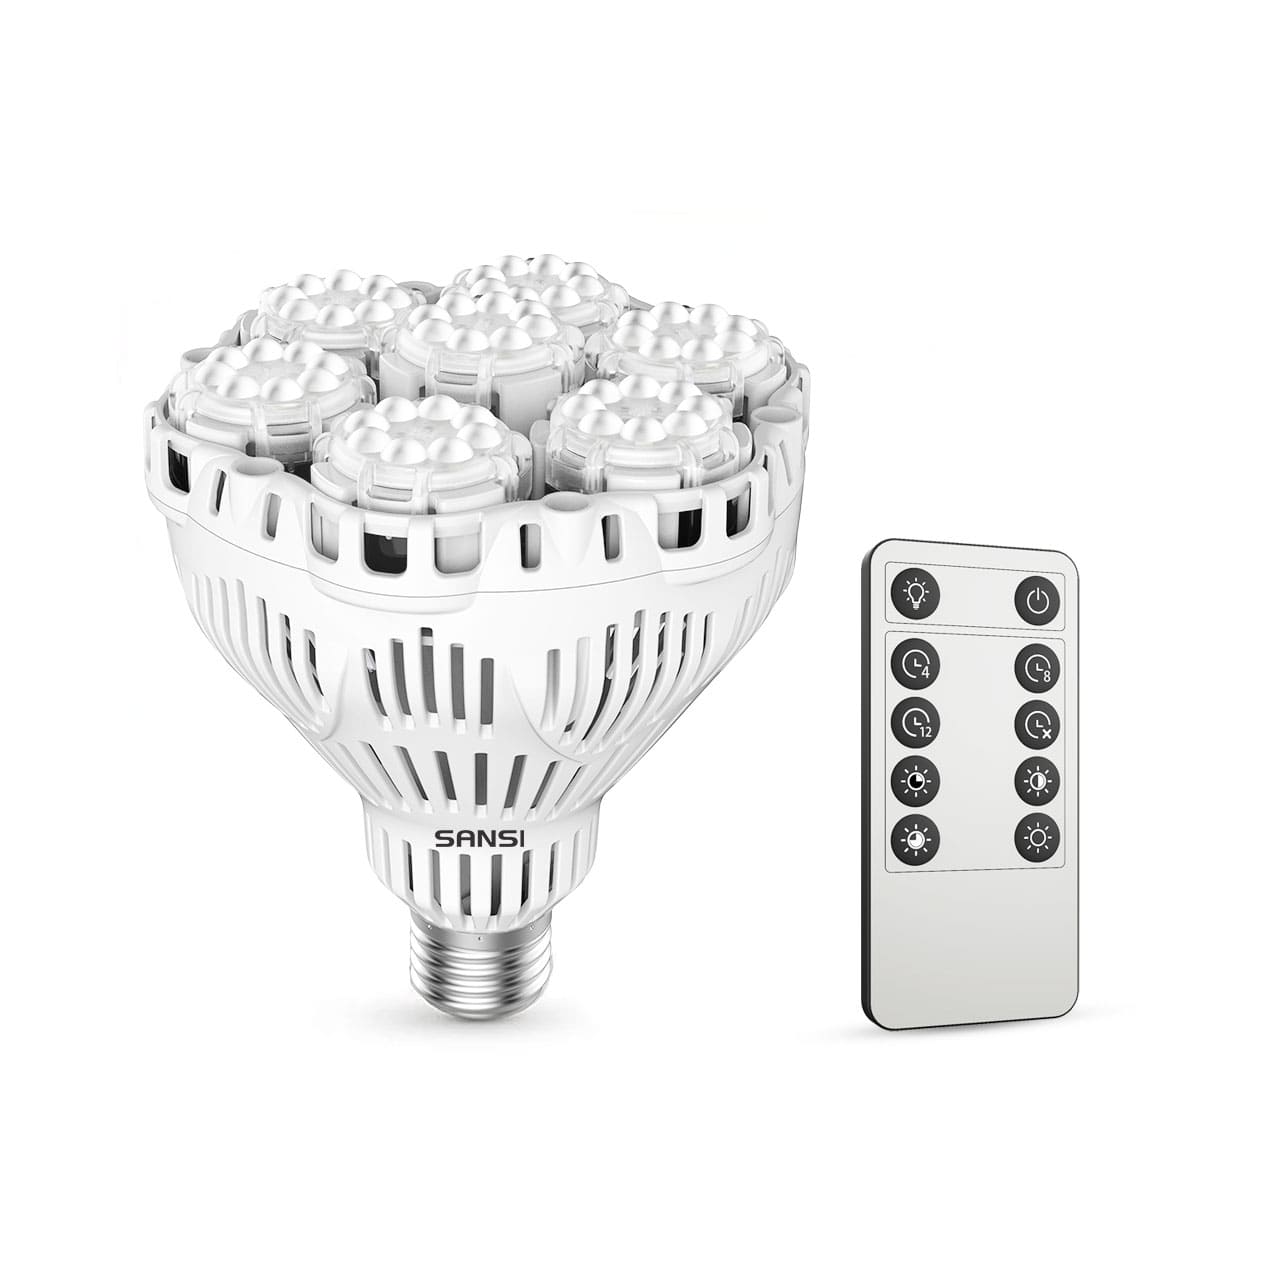 BR30 40W LED Grow Light Bulb With Remote Control (US ONLY)